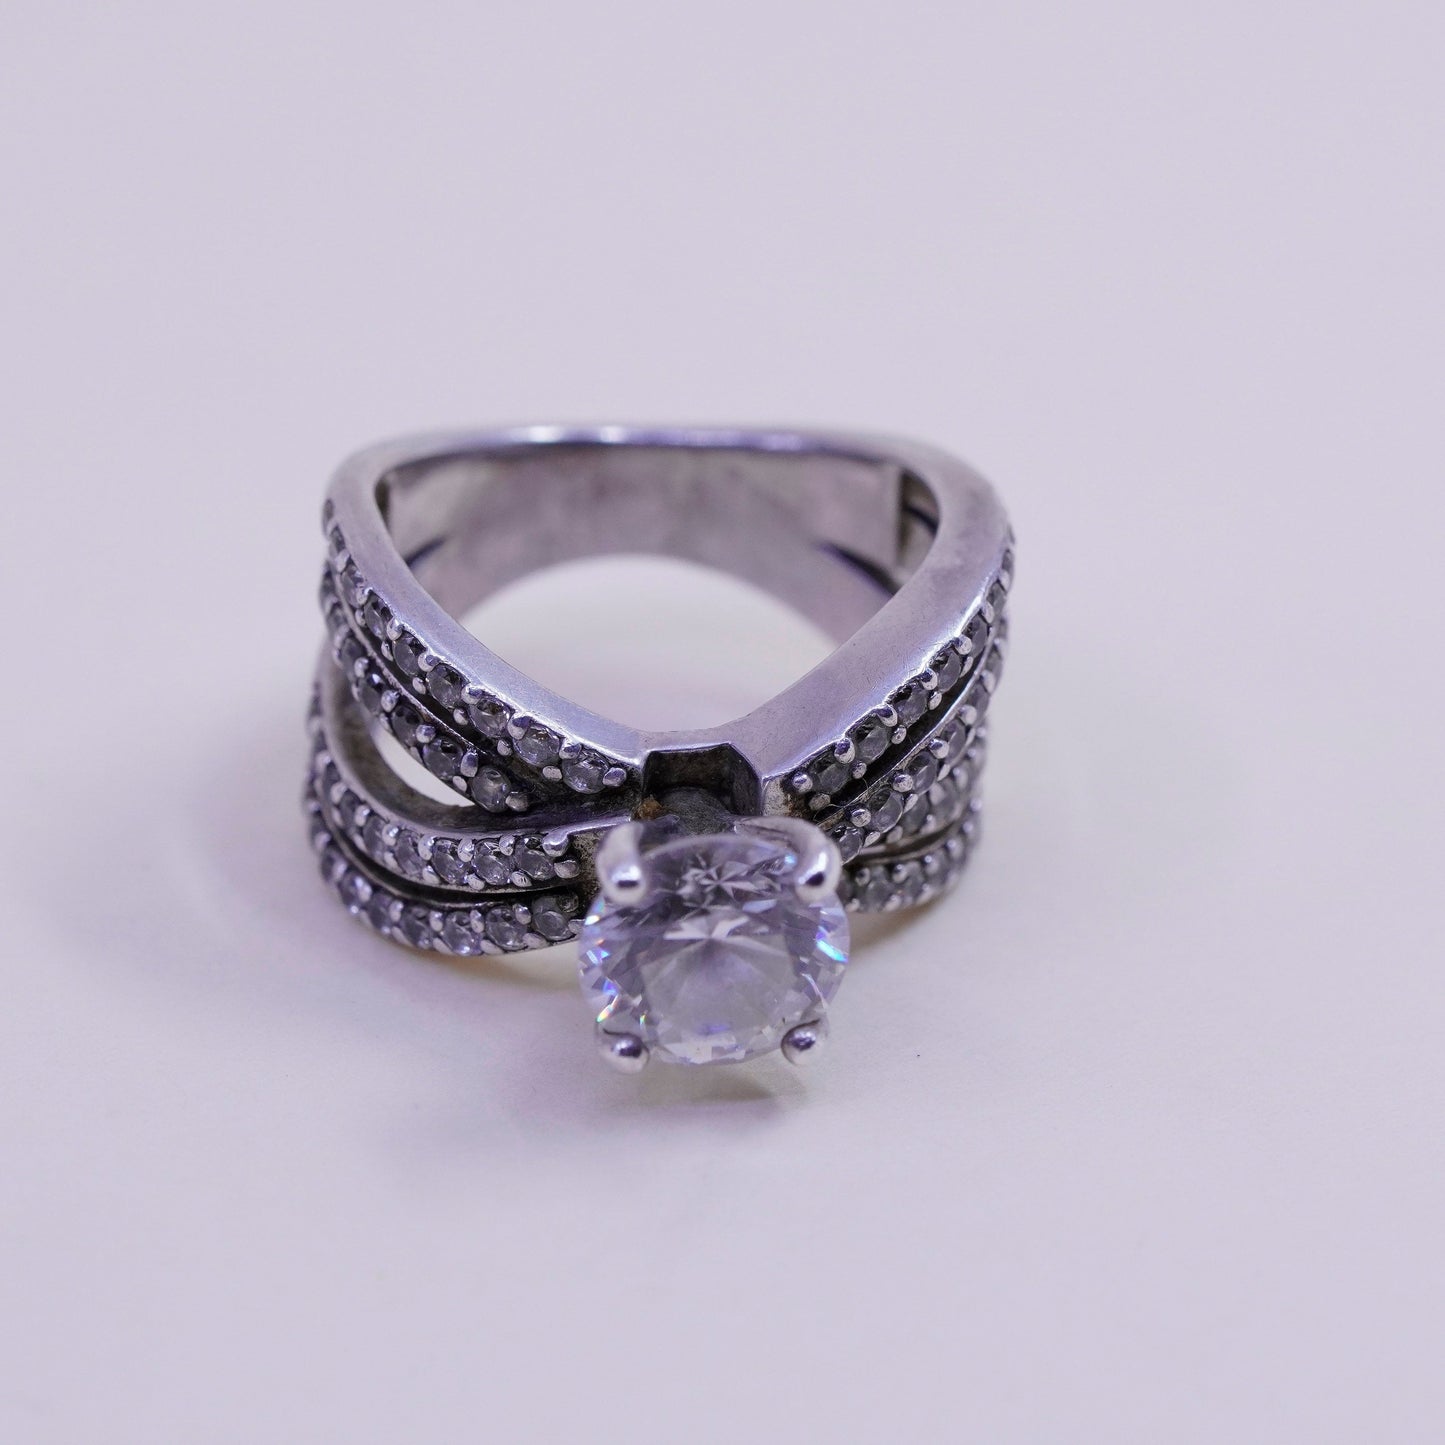 Size 6.25, Sterling silver ring, 925 silver with round cut cz, engagement ring